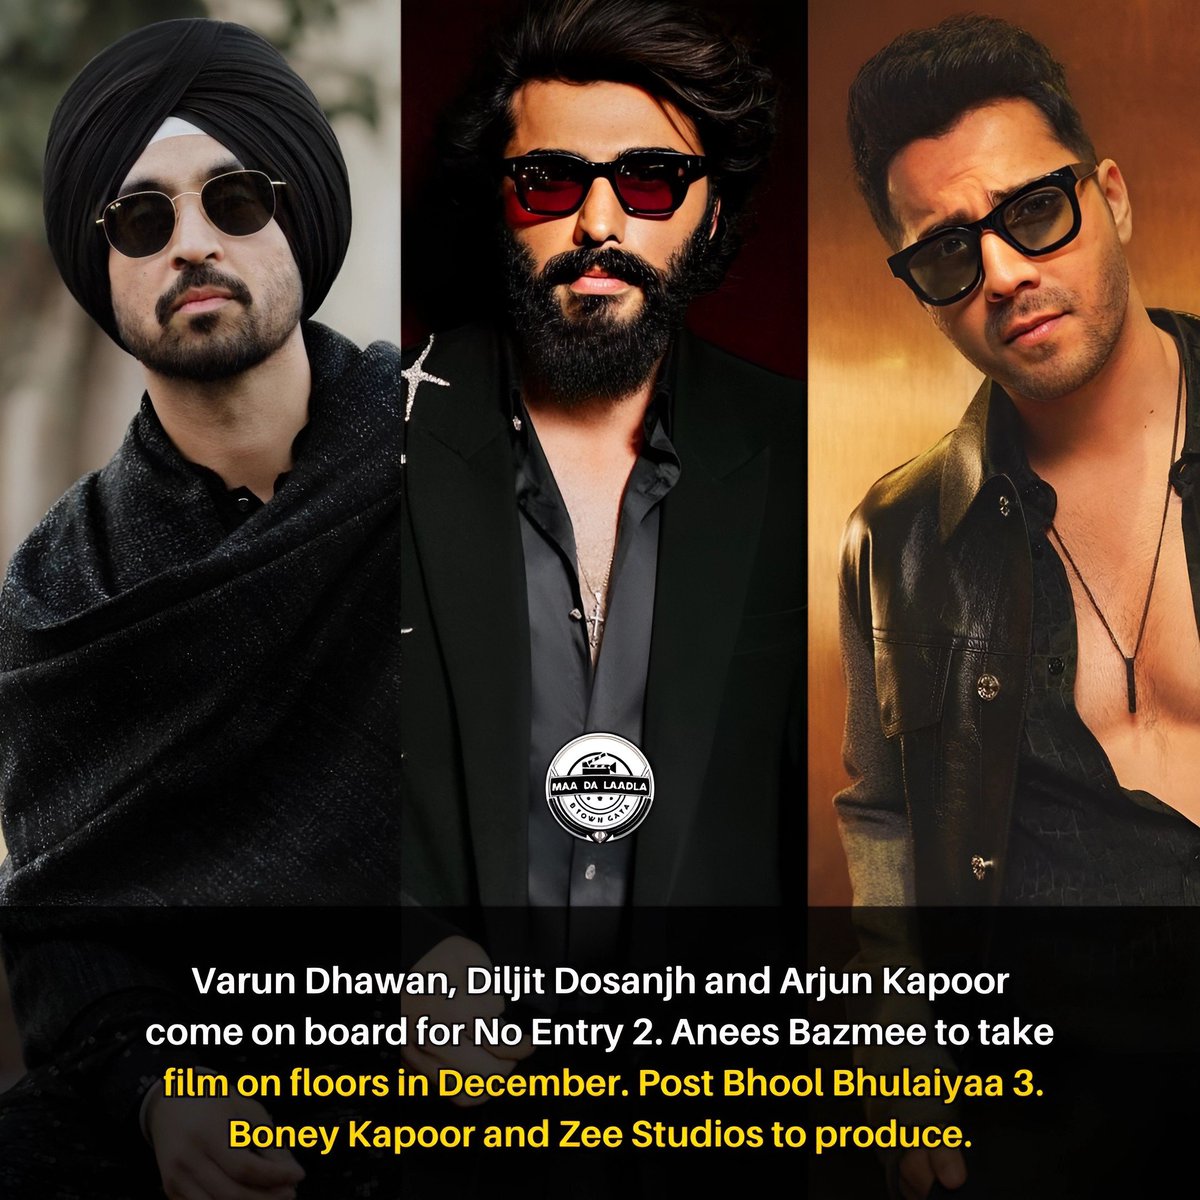 #VarunDhawan, #DiljitDosanjh and #ArjunKapoor come on board for #NoEntry2. 😎🔥

#NoEntryMeinEntry #AneesBazmee